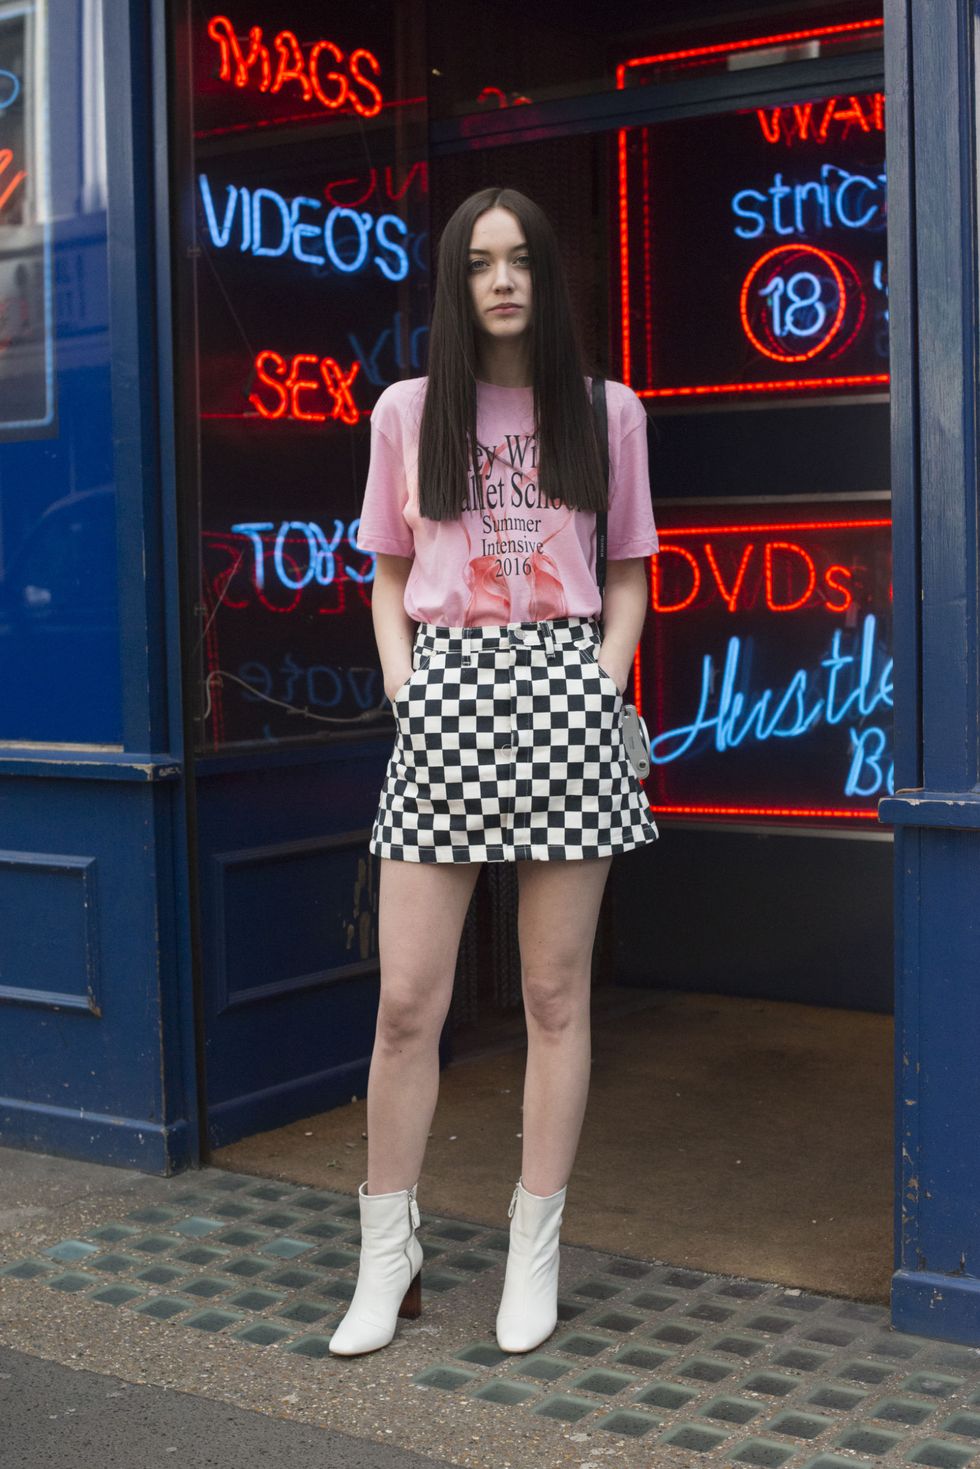 LONDON, ENGLAND - FEBRUARY 23: Influencer and model Elizabeth Jane Bishop wears a Unif skirt, Ashley Williams t-shirt, and Kurt Geiger shoes on day 5 during London Fashion Week Autumn/Winter 2016/17 on February 23, 2016 in London, England.  (Photo by Kirstin Sinclair/Getty Images)